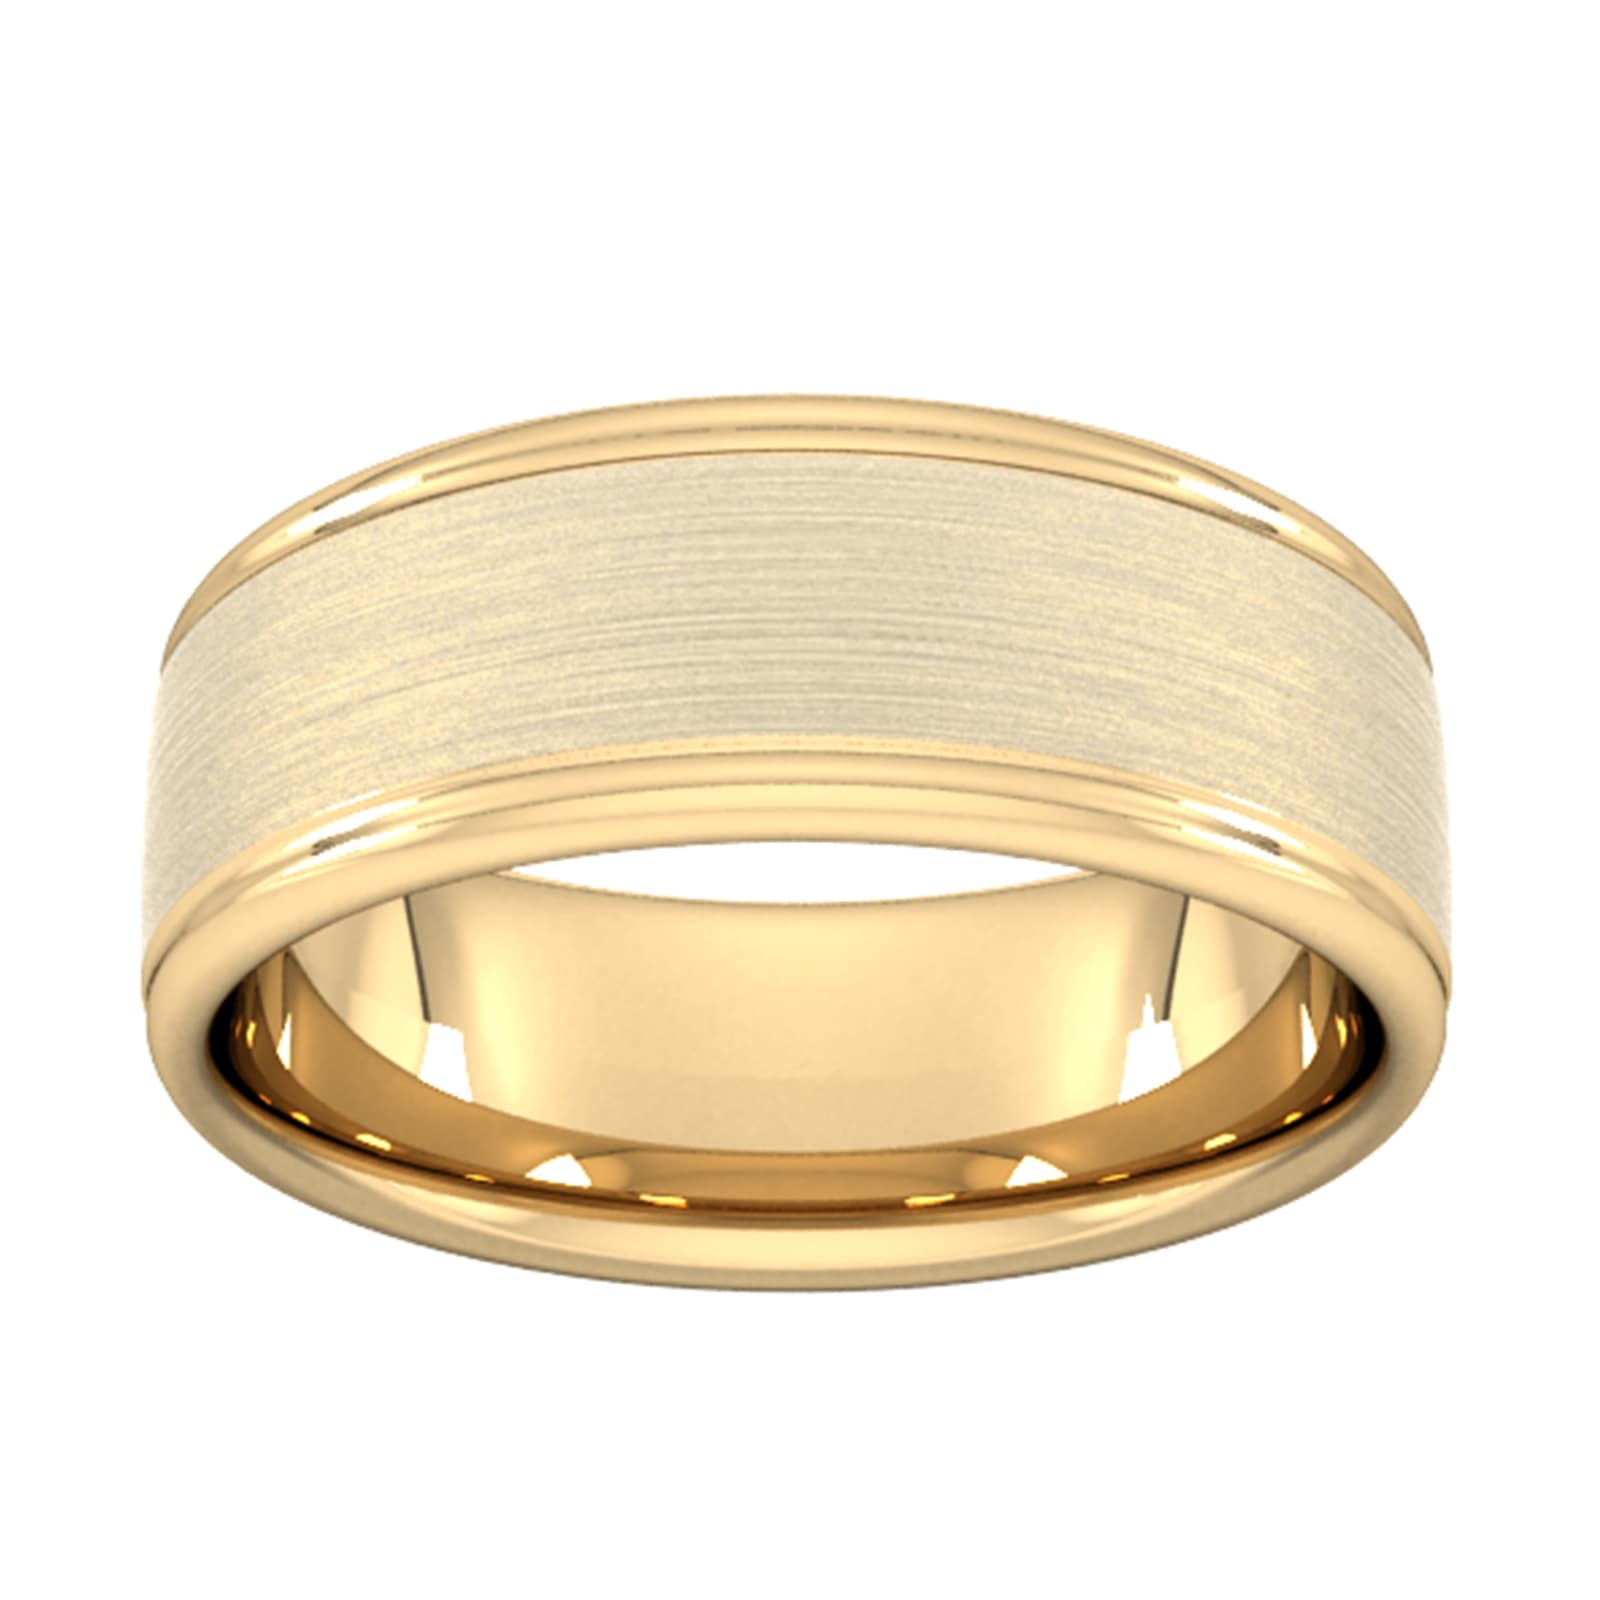 8mm Slight Court Standard Matt Centre With Grooves Wedding Ring In 18 Carat Yellow Gold - Ring Size X